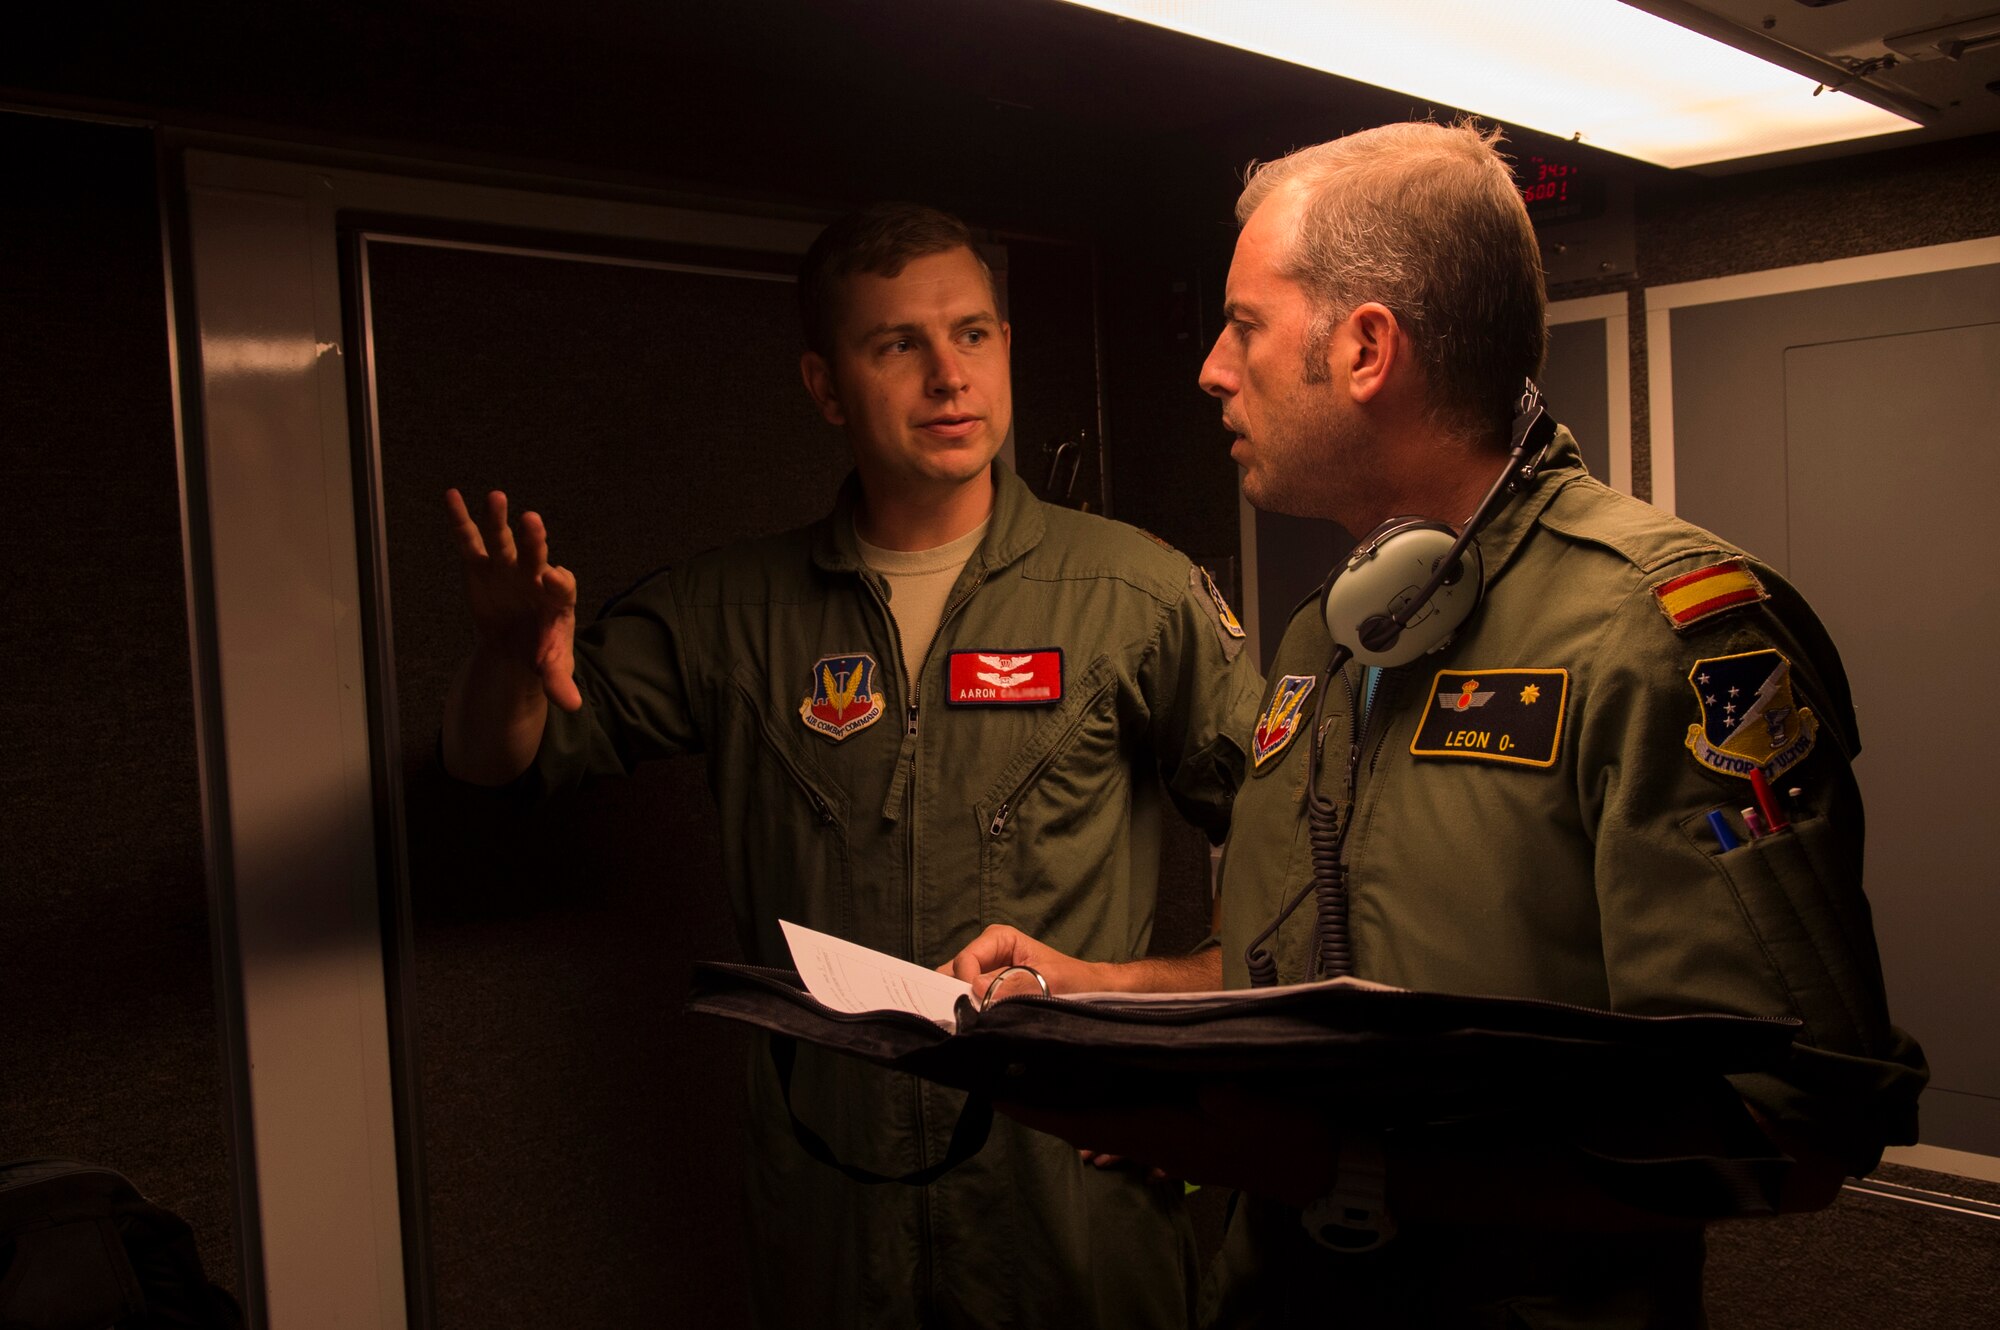 Maj. Aaron, a 29th Attack Squadron MQ-9 Reaper instructor pilot, left, and Maj. Jaime, a Spanish air force student pilot, right, discuss MQ-9 flight procedures at Holloman Air Force Base, NM on April 19, 2017. Spain is currently participating in essential training here at the MQ-9 formal training unit. (U.S. Air Force photo by Tech. Sgt. Amanda Junk)